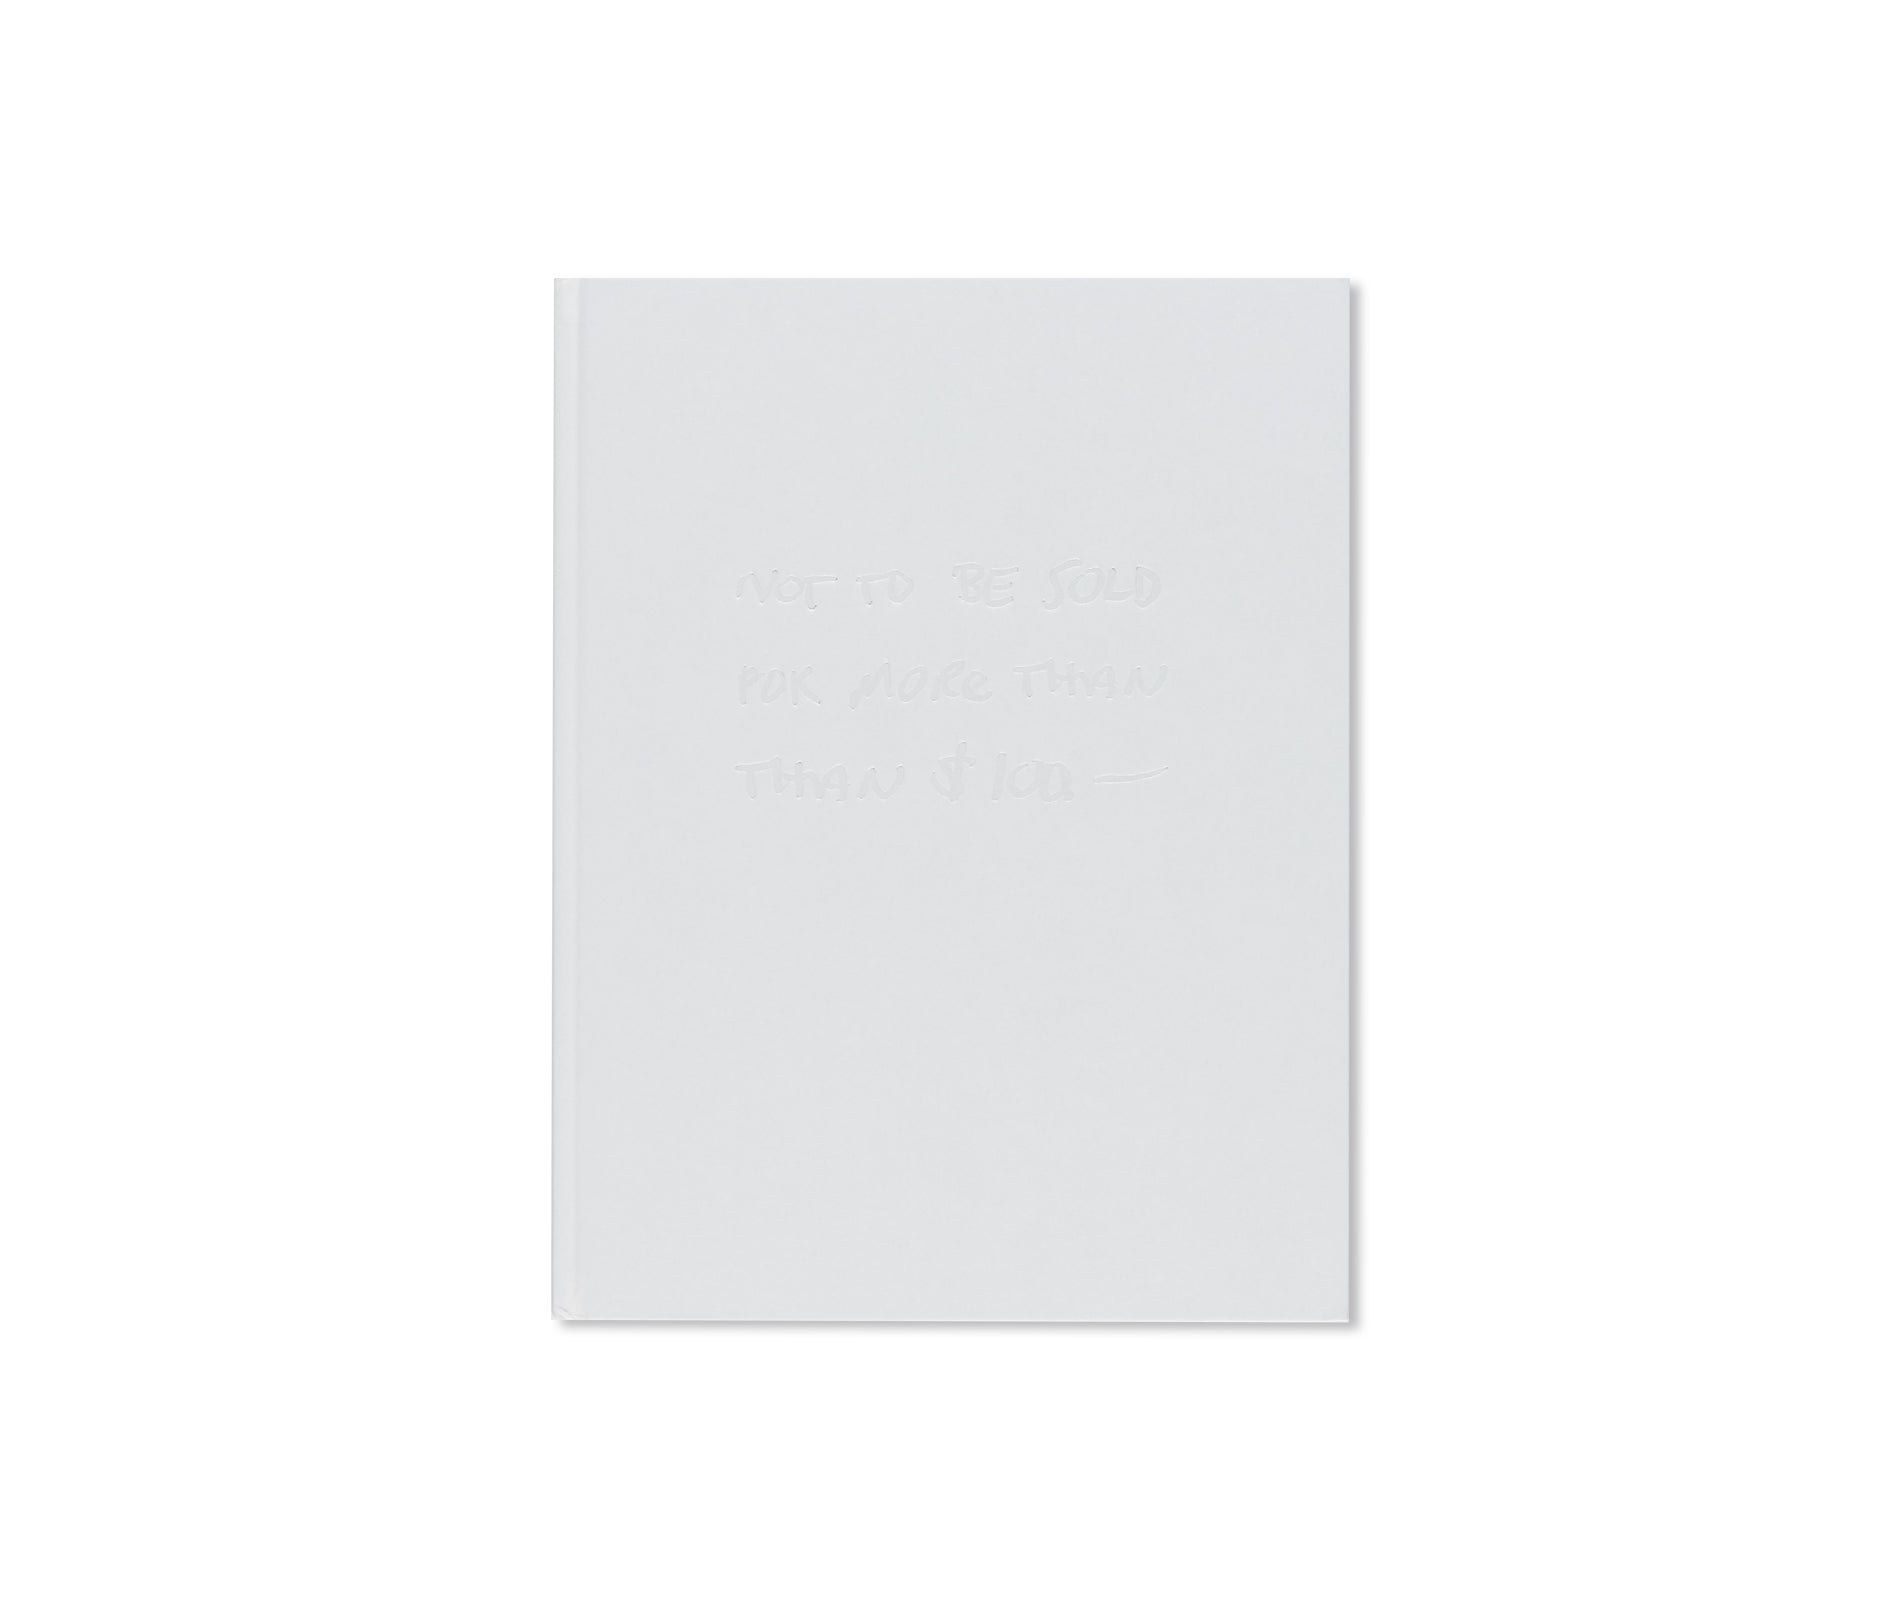 NOT TO BE SOLD FOR MORE THAN $100 by Sol LeWitt